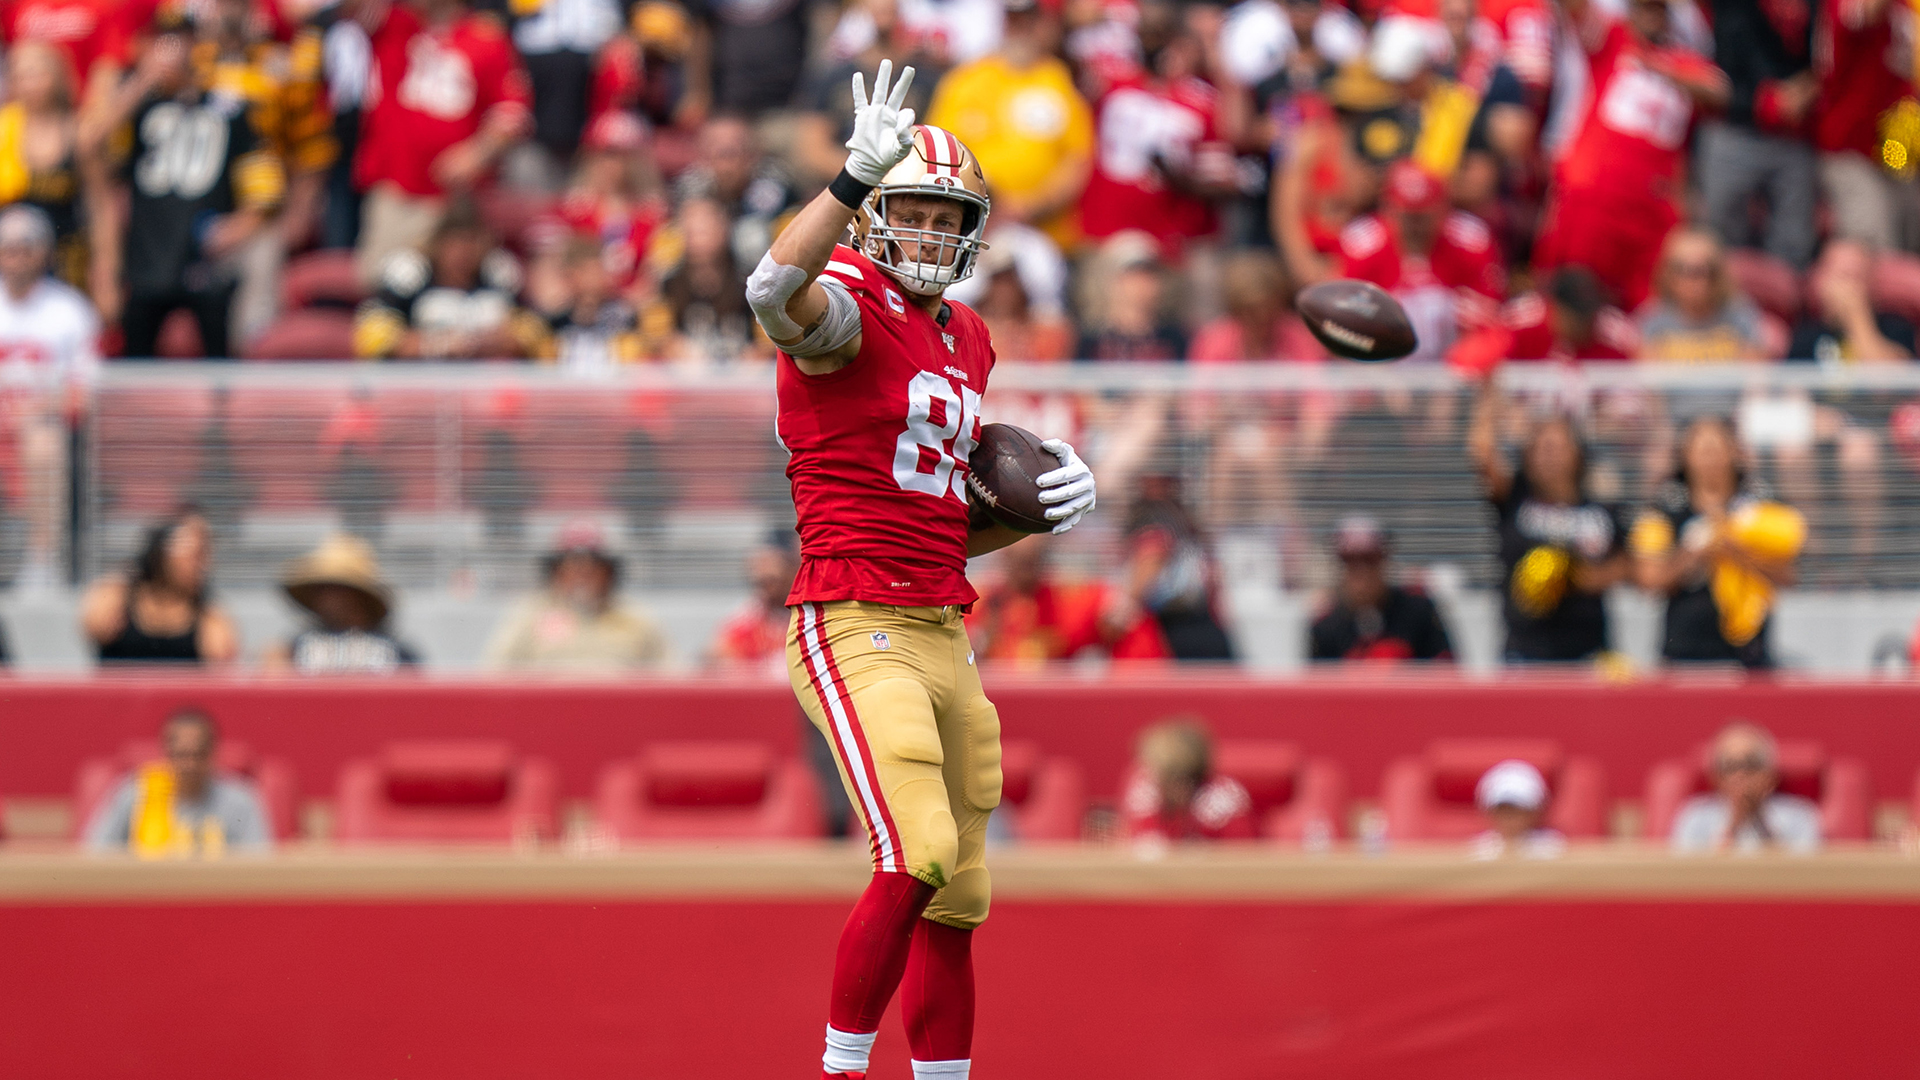 “George Kittle's No. 7 ranking is the highest ever for a TE in the ...